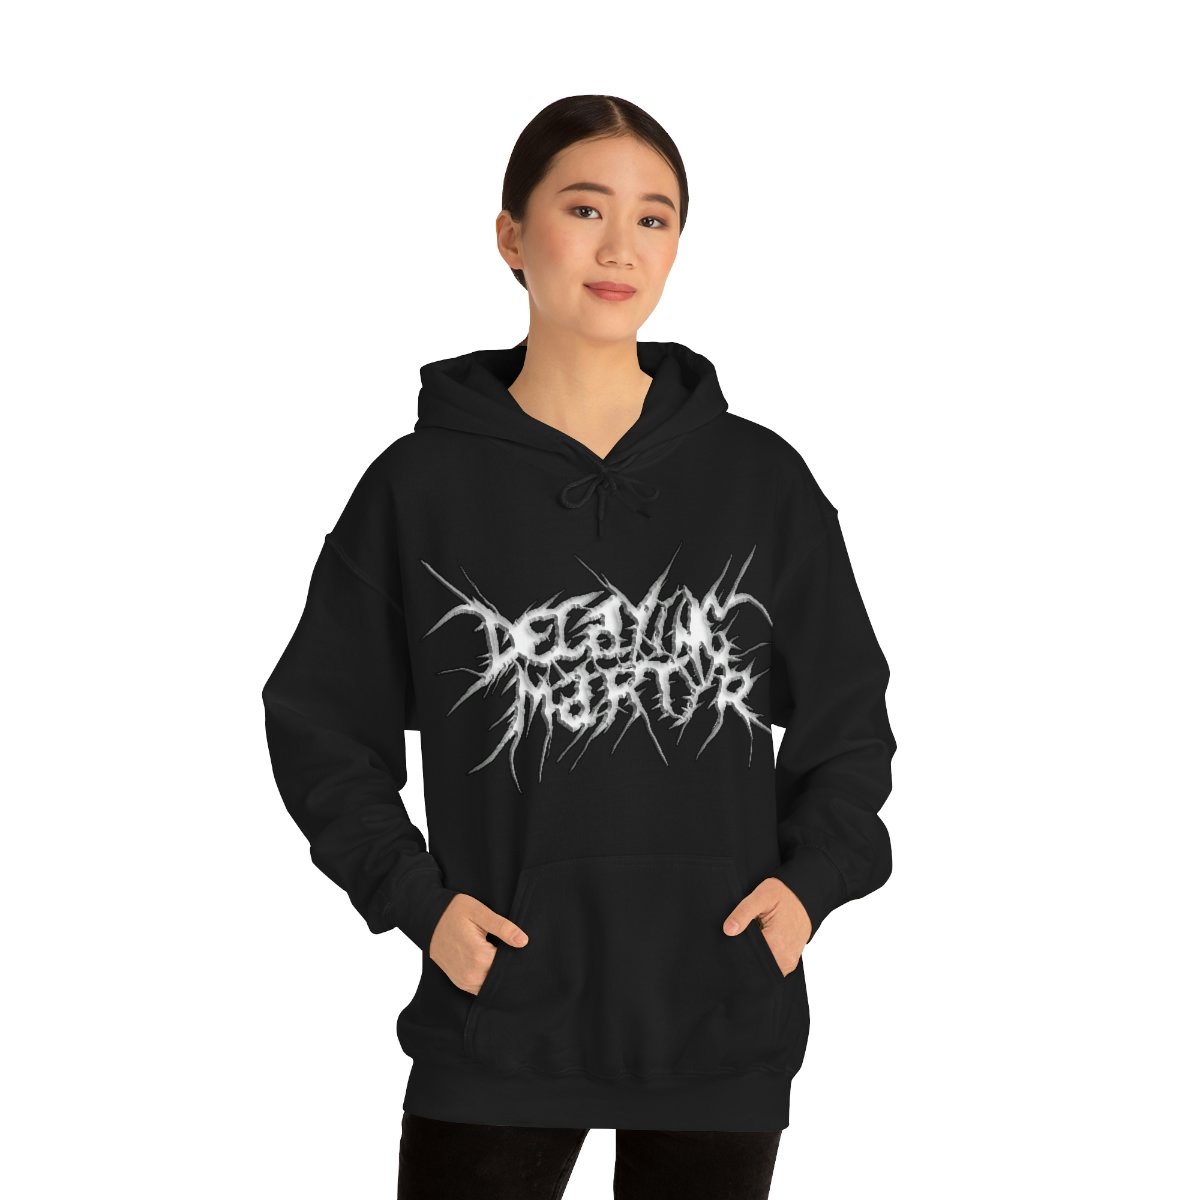 Decaying Martyr 3D Logo Pullover Hooded Sweatshirt